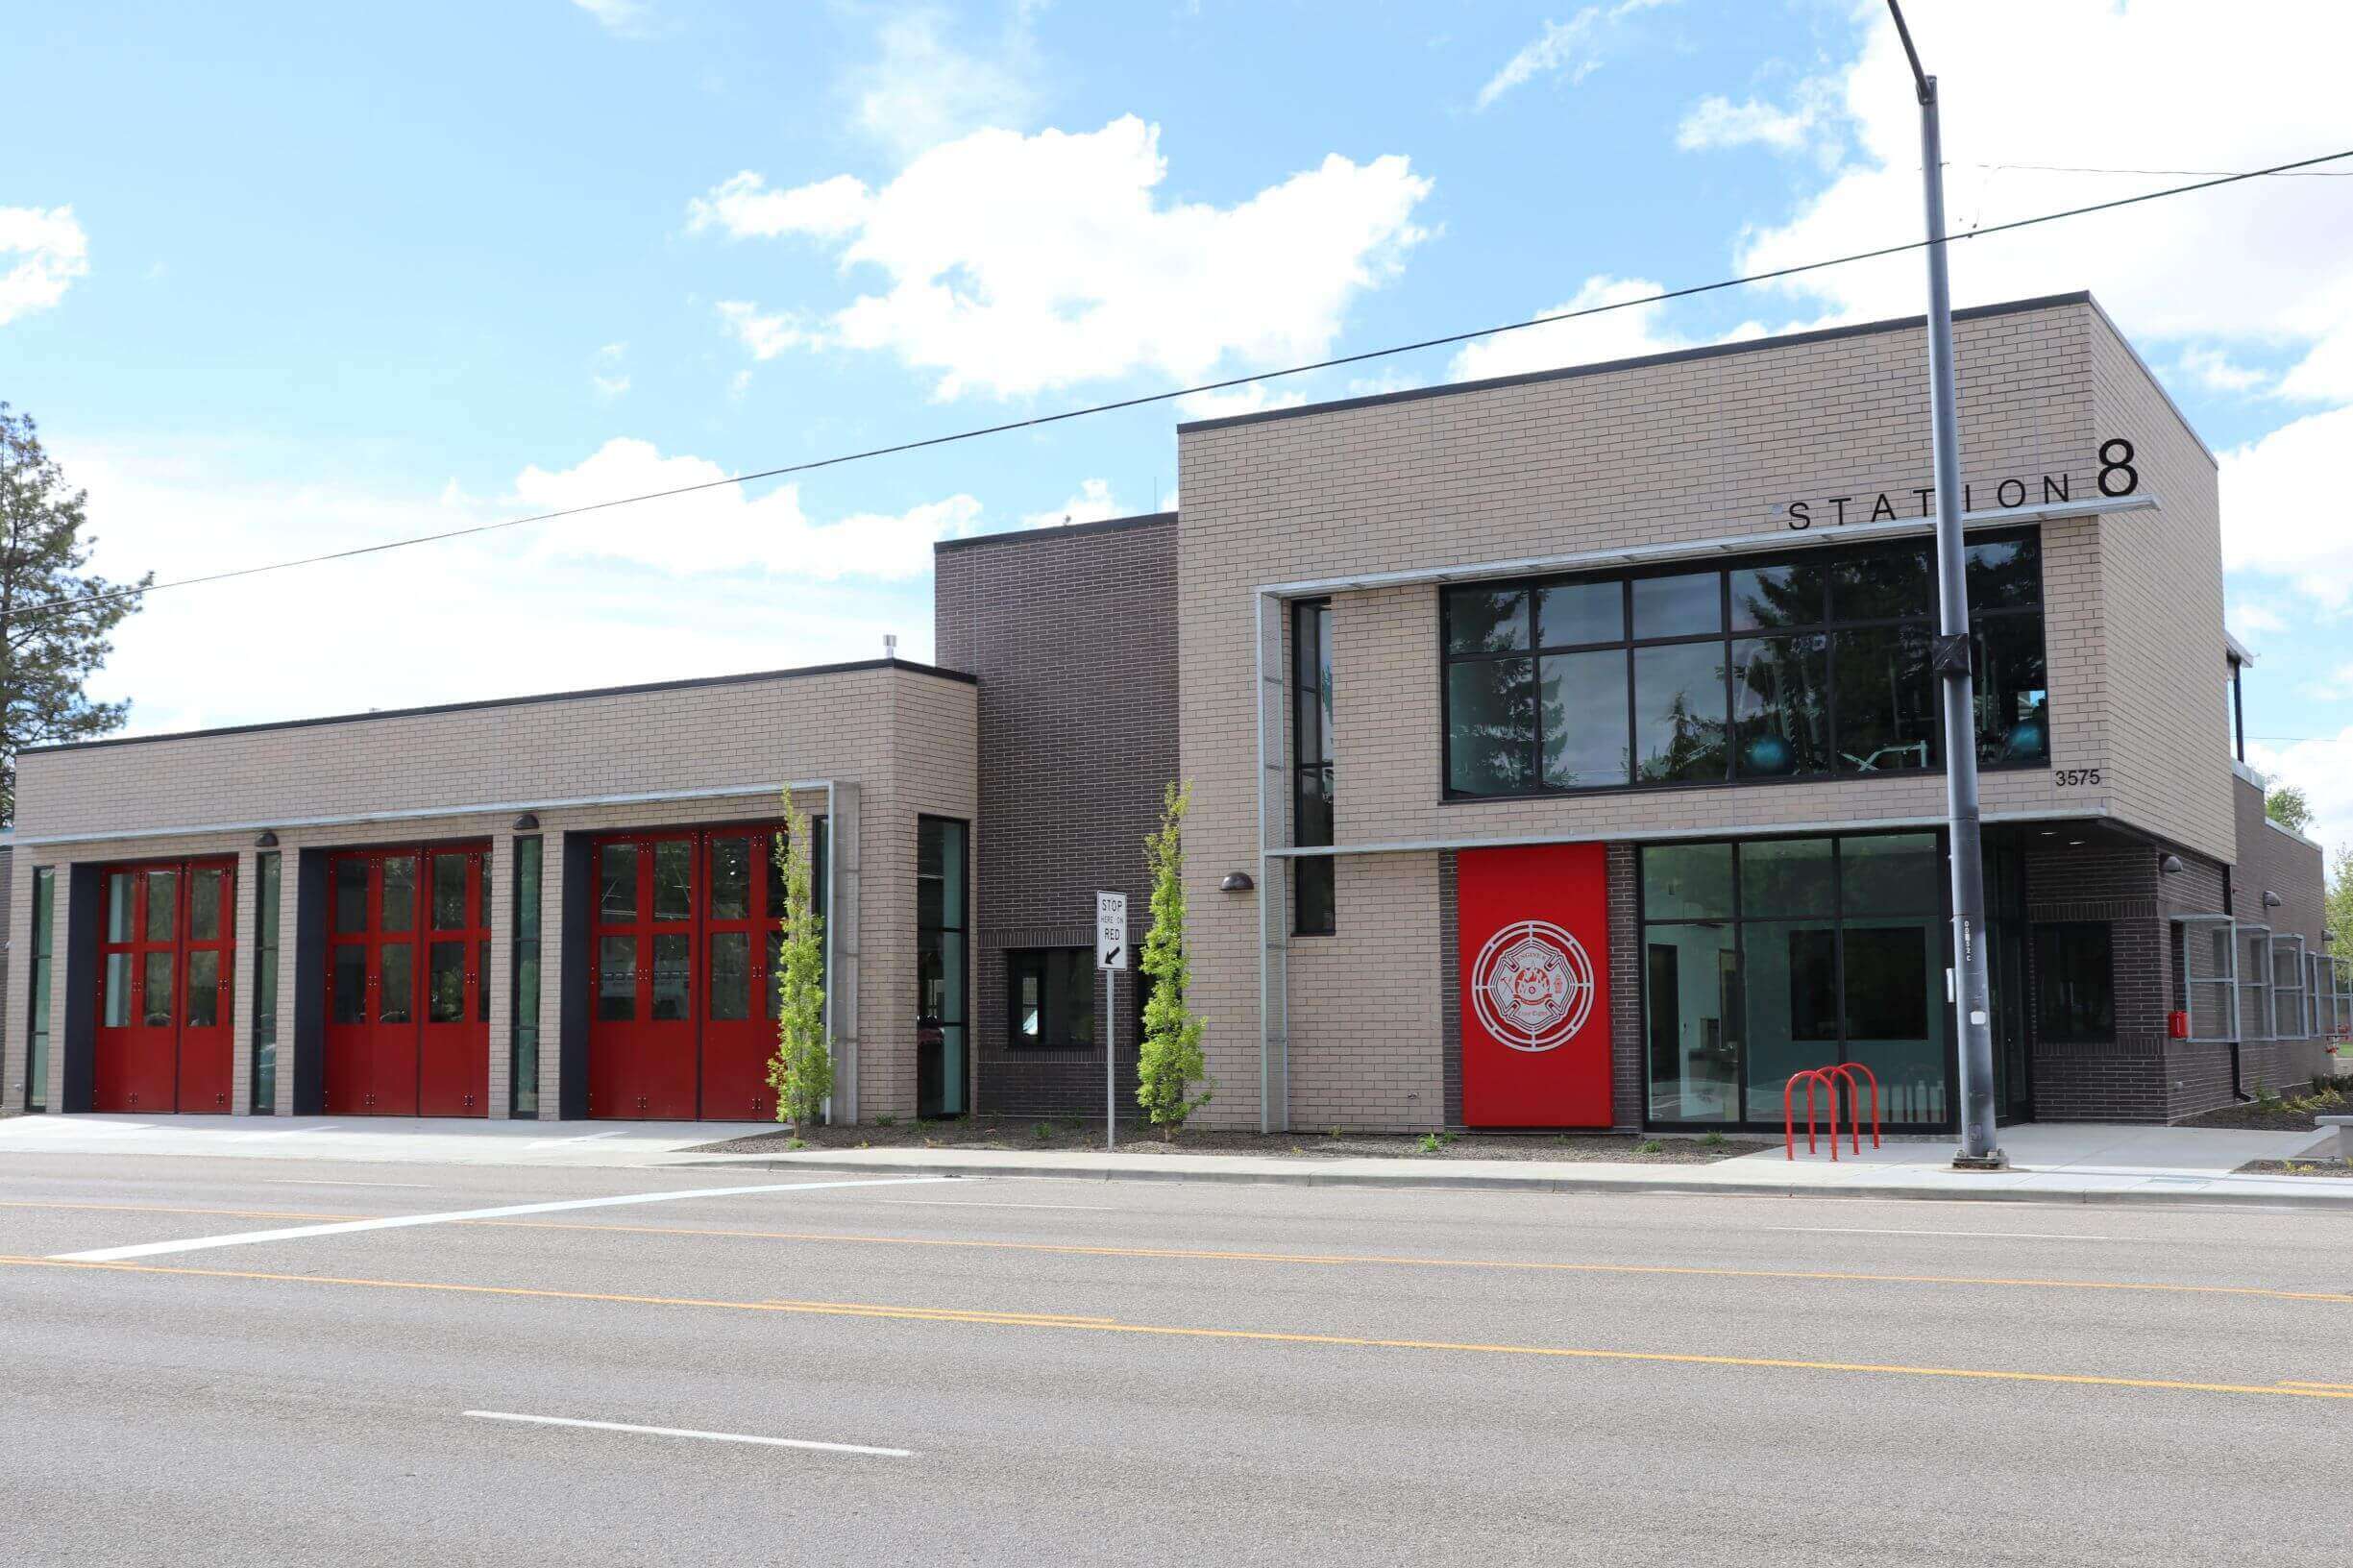 new fire station near me